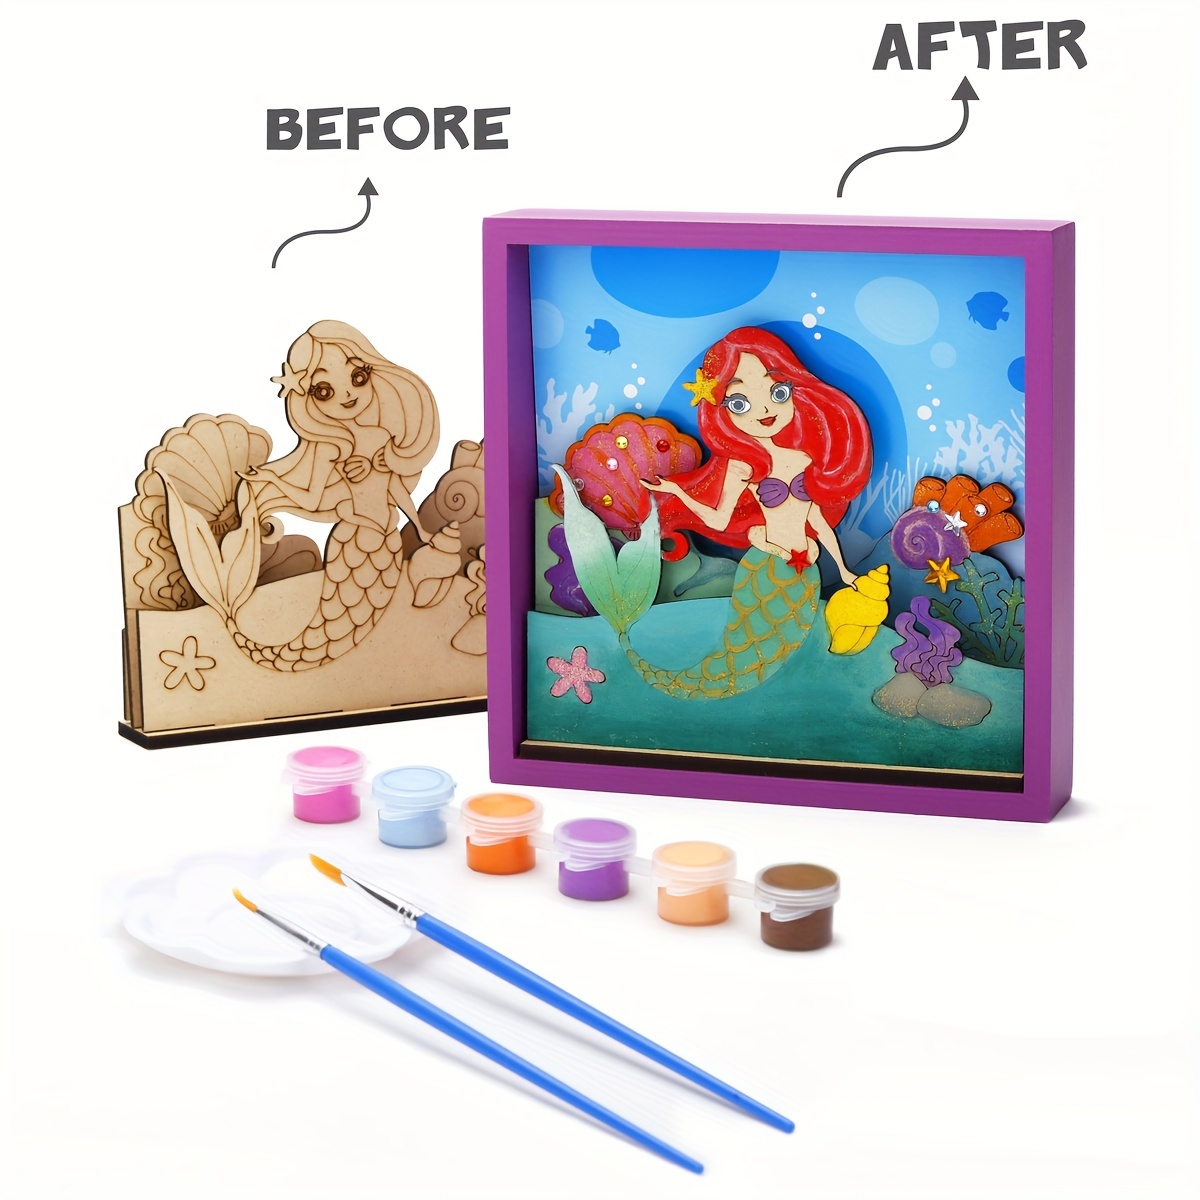  whatstem 3D Scene Wooden Arts and Crafts for Kids, Painting Toy  to Paint Your Own Dinosaur Picture Frame Craft Kits, Ideal Gifts for Boys  and Girls : Toys & Games